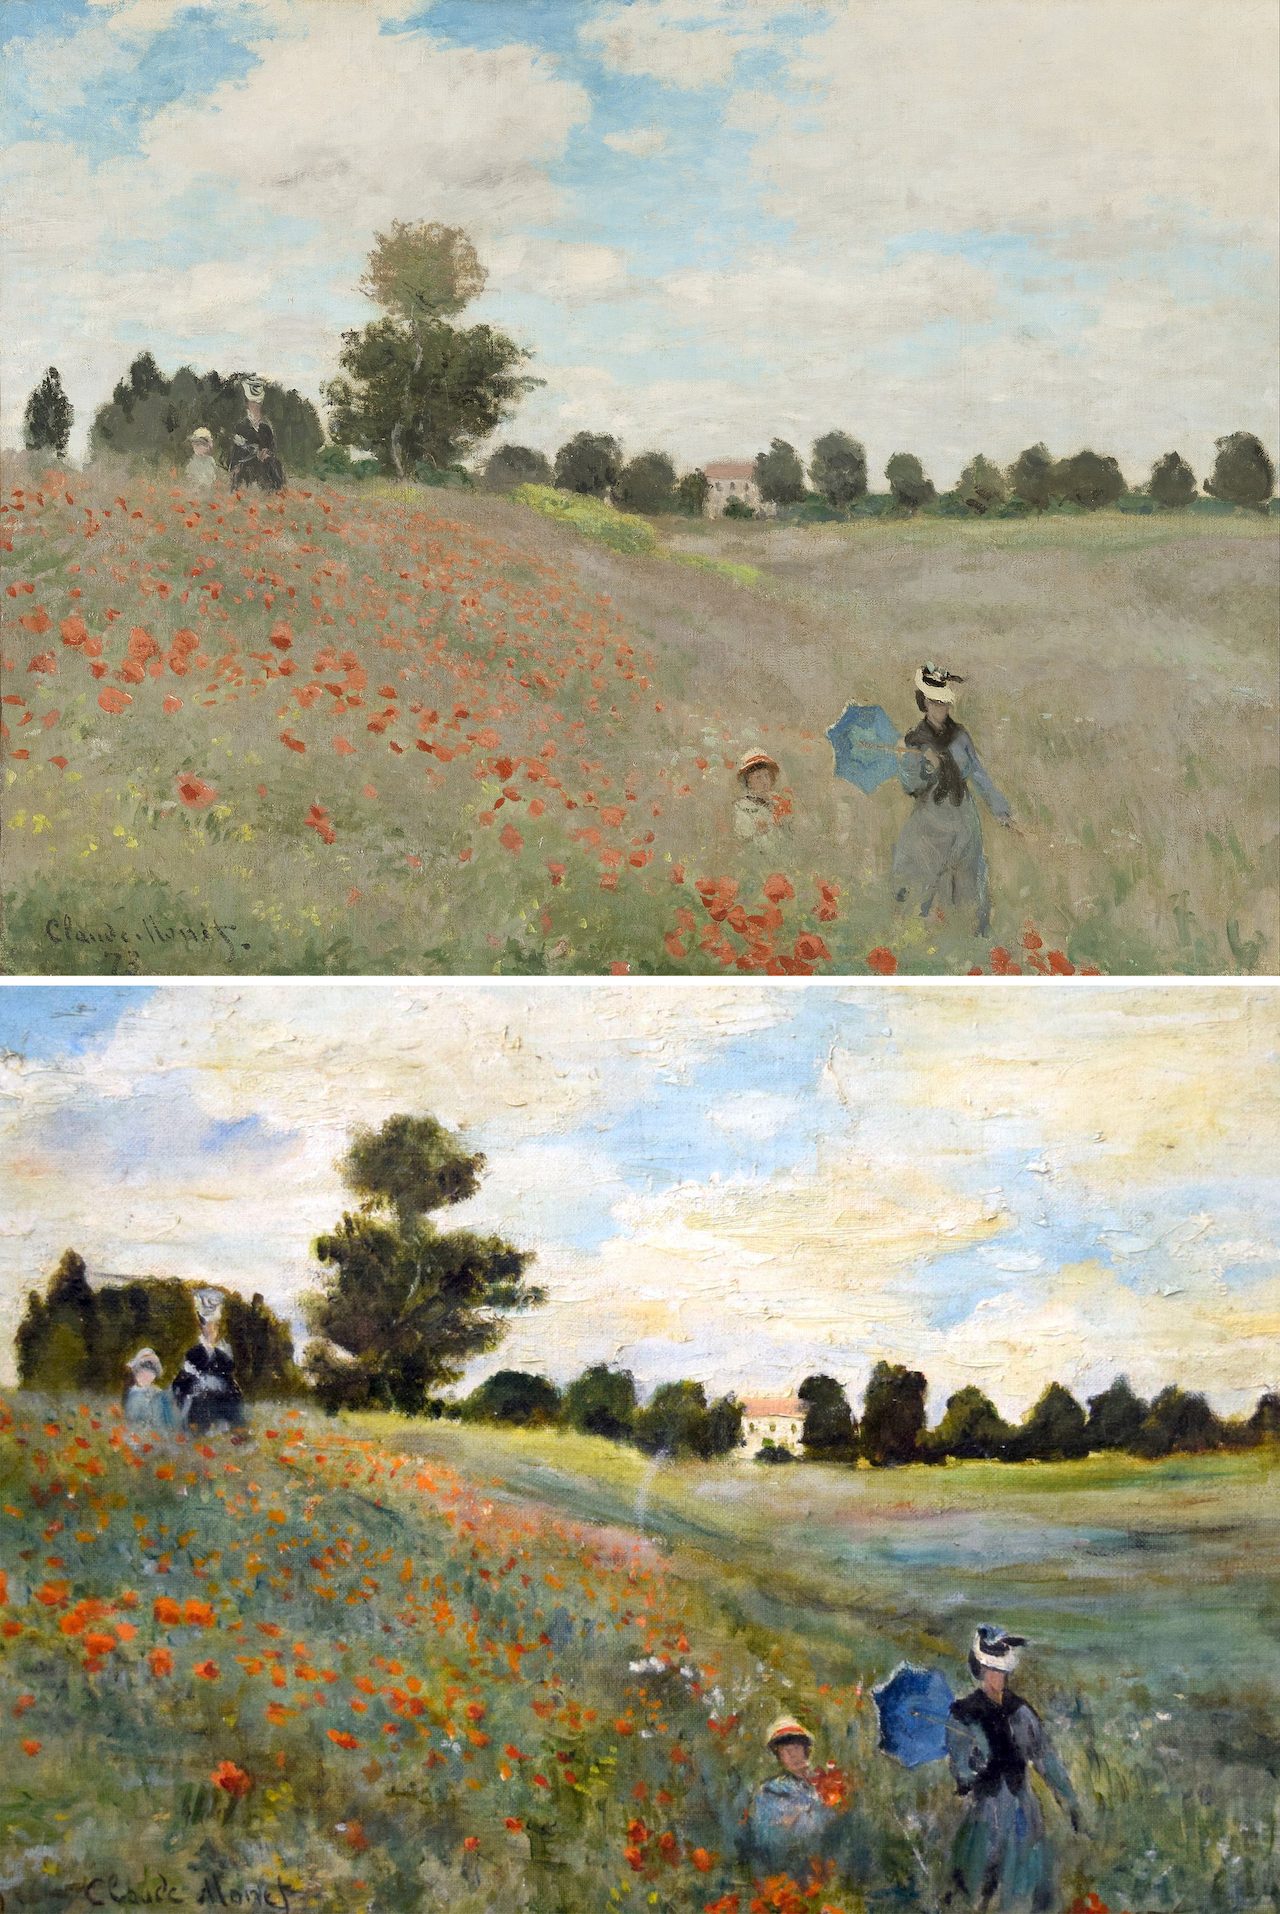 A collage of two paintings, both paintings show two pairs consisting of a mother and a child walking in a field of poppies. Trees and a house can be seen in the background.